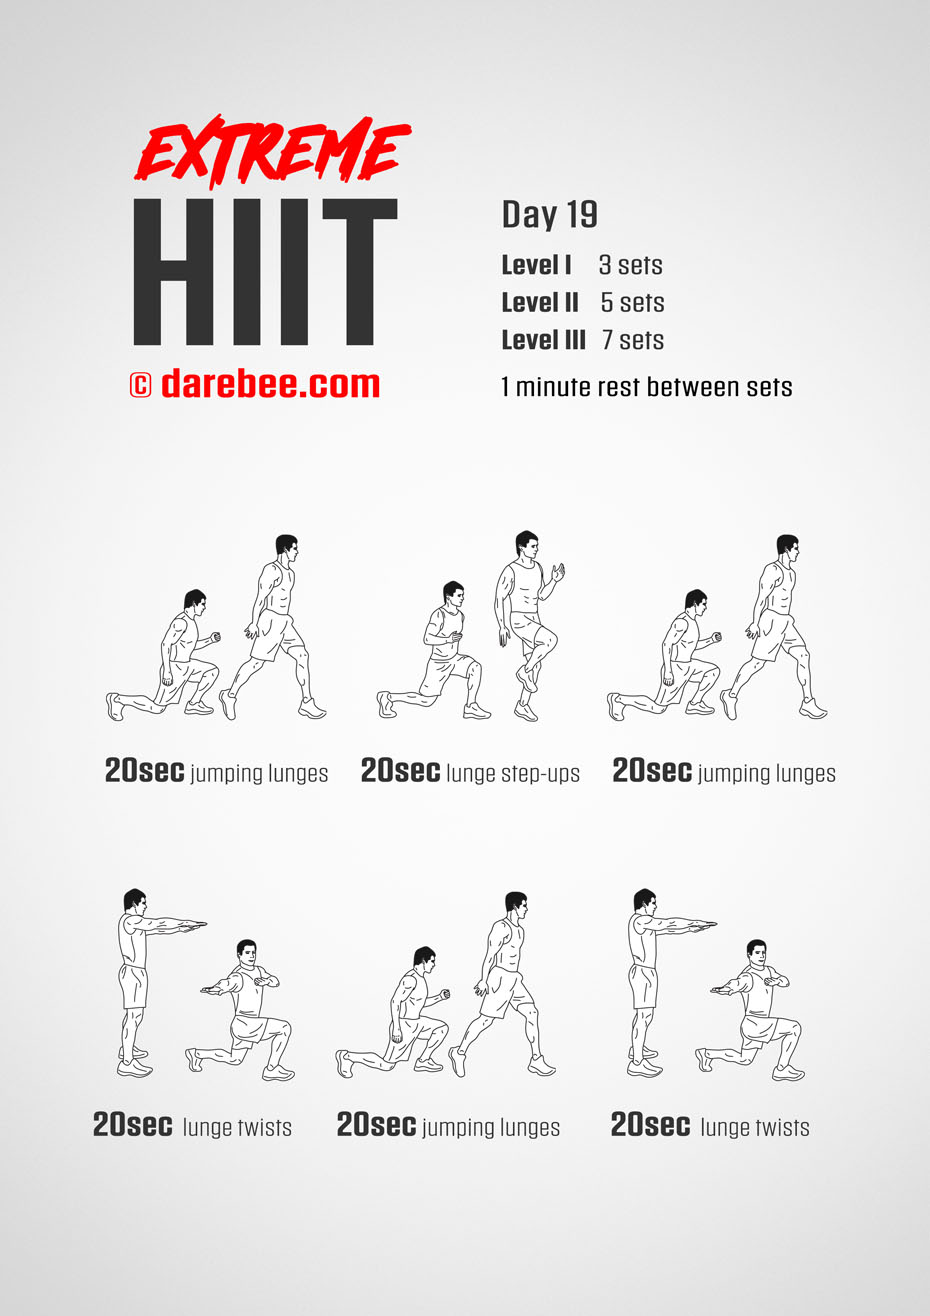 Extreme HIIT by DAREBEE